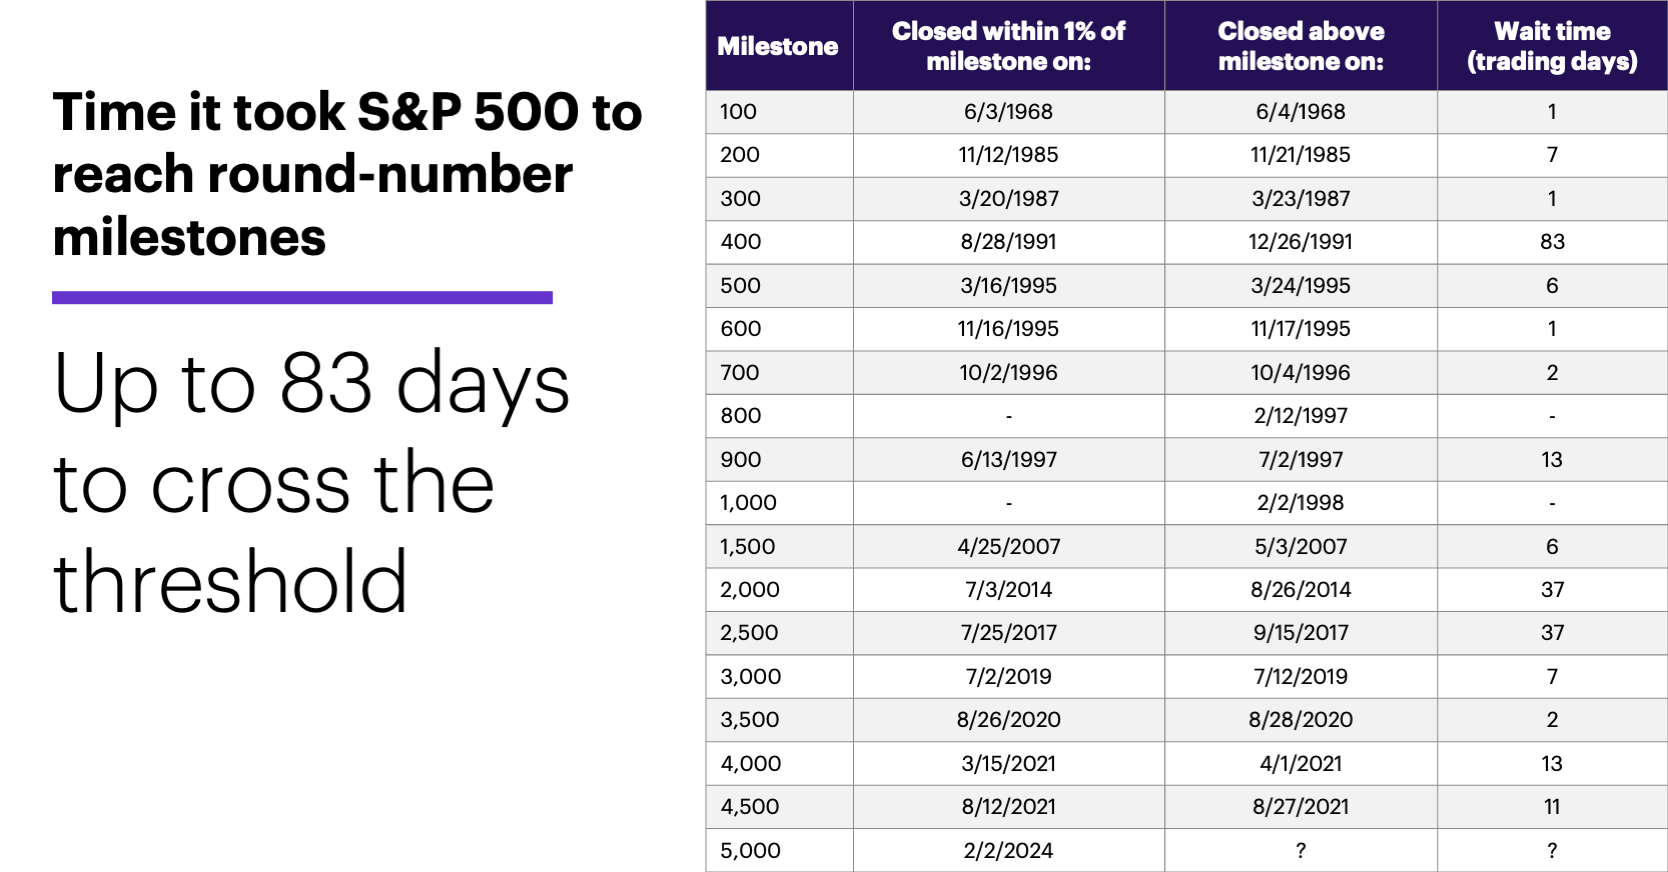 Chart 1: Time it took S&P 500 to reach round-number milestones. Up to 83 days to cross the threshold. 